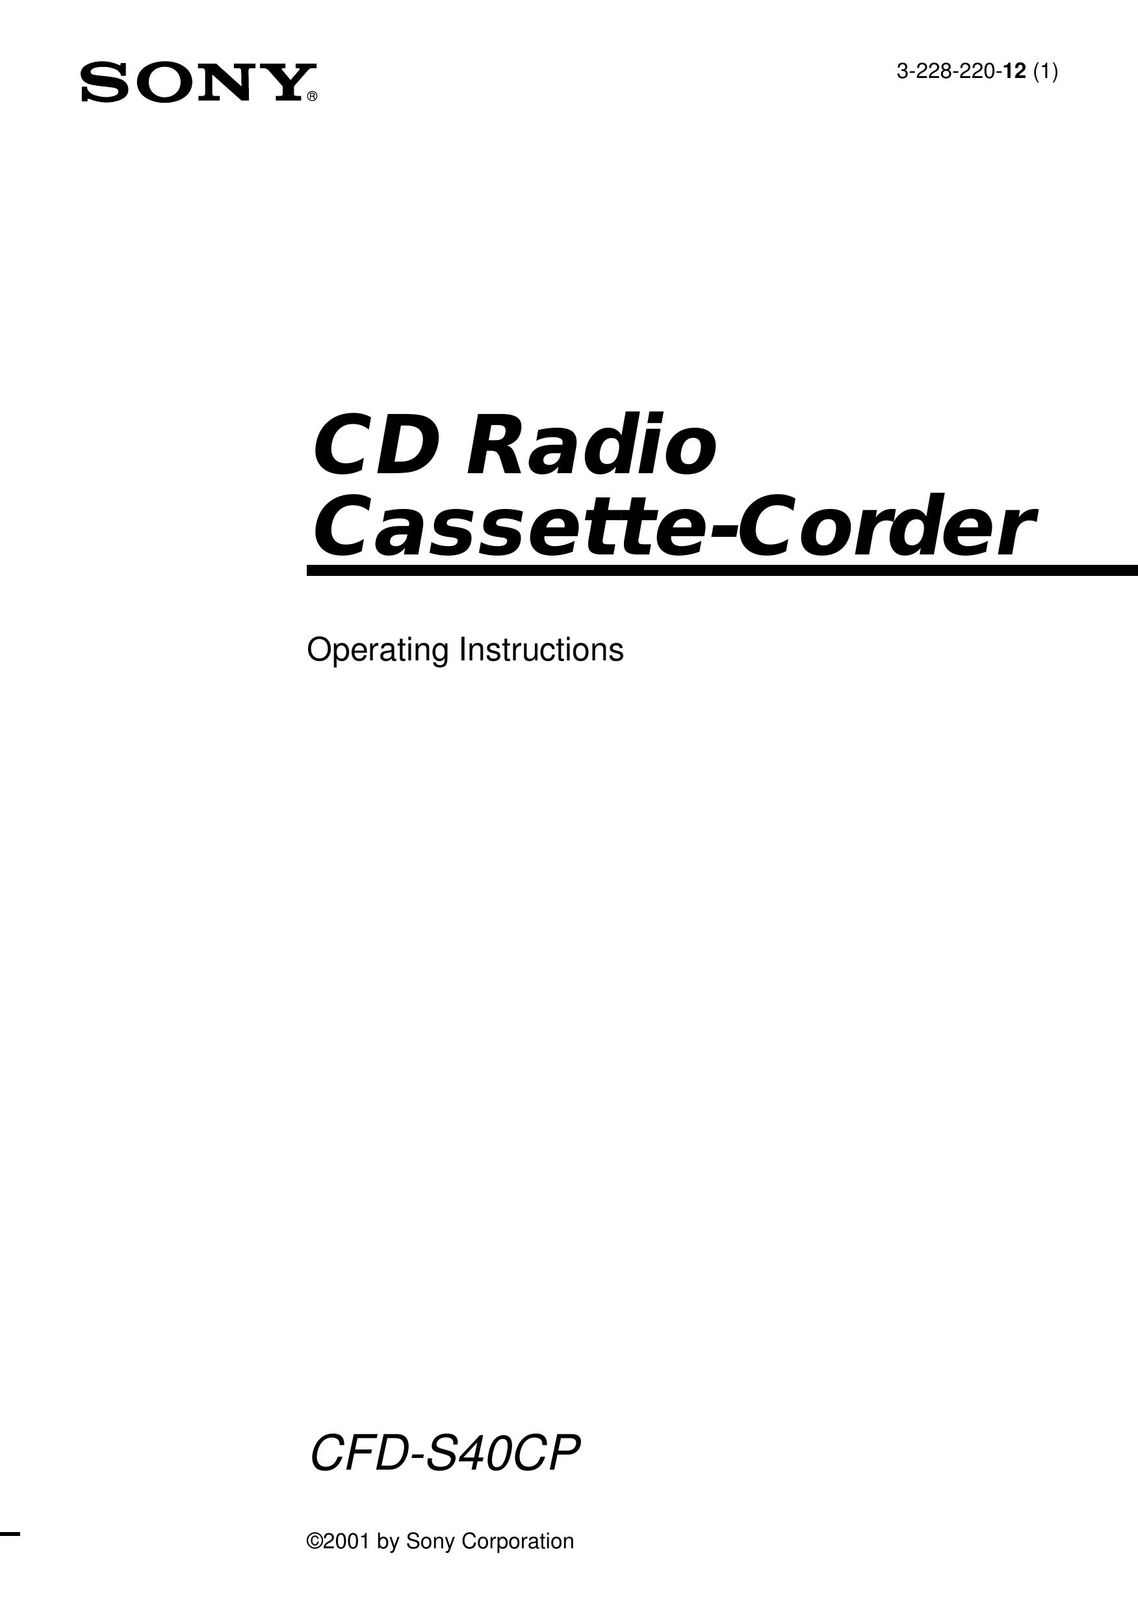 Sony CFD-S40CP MP3 Player User Manual